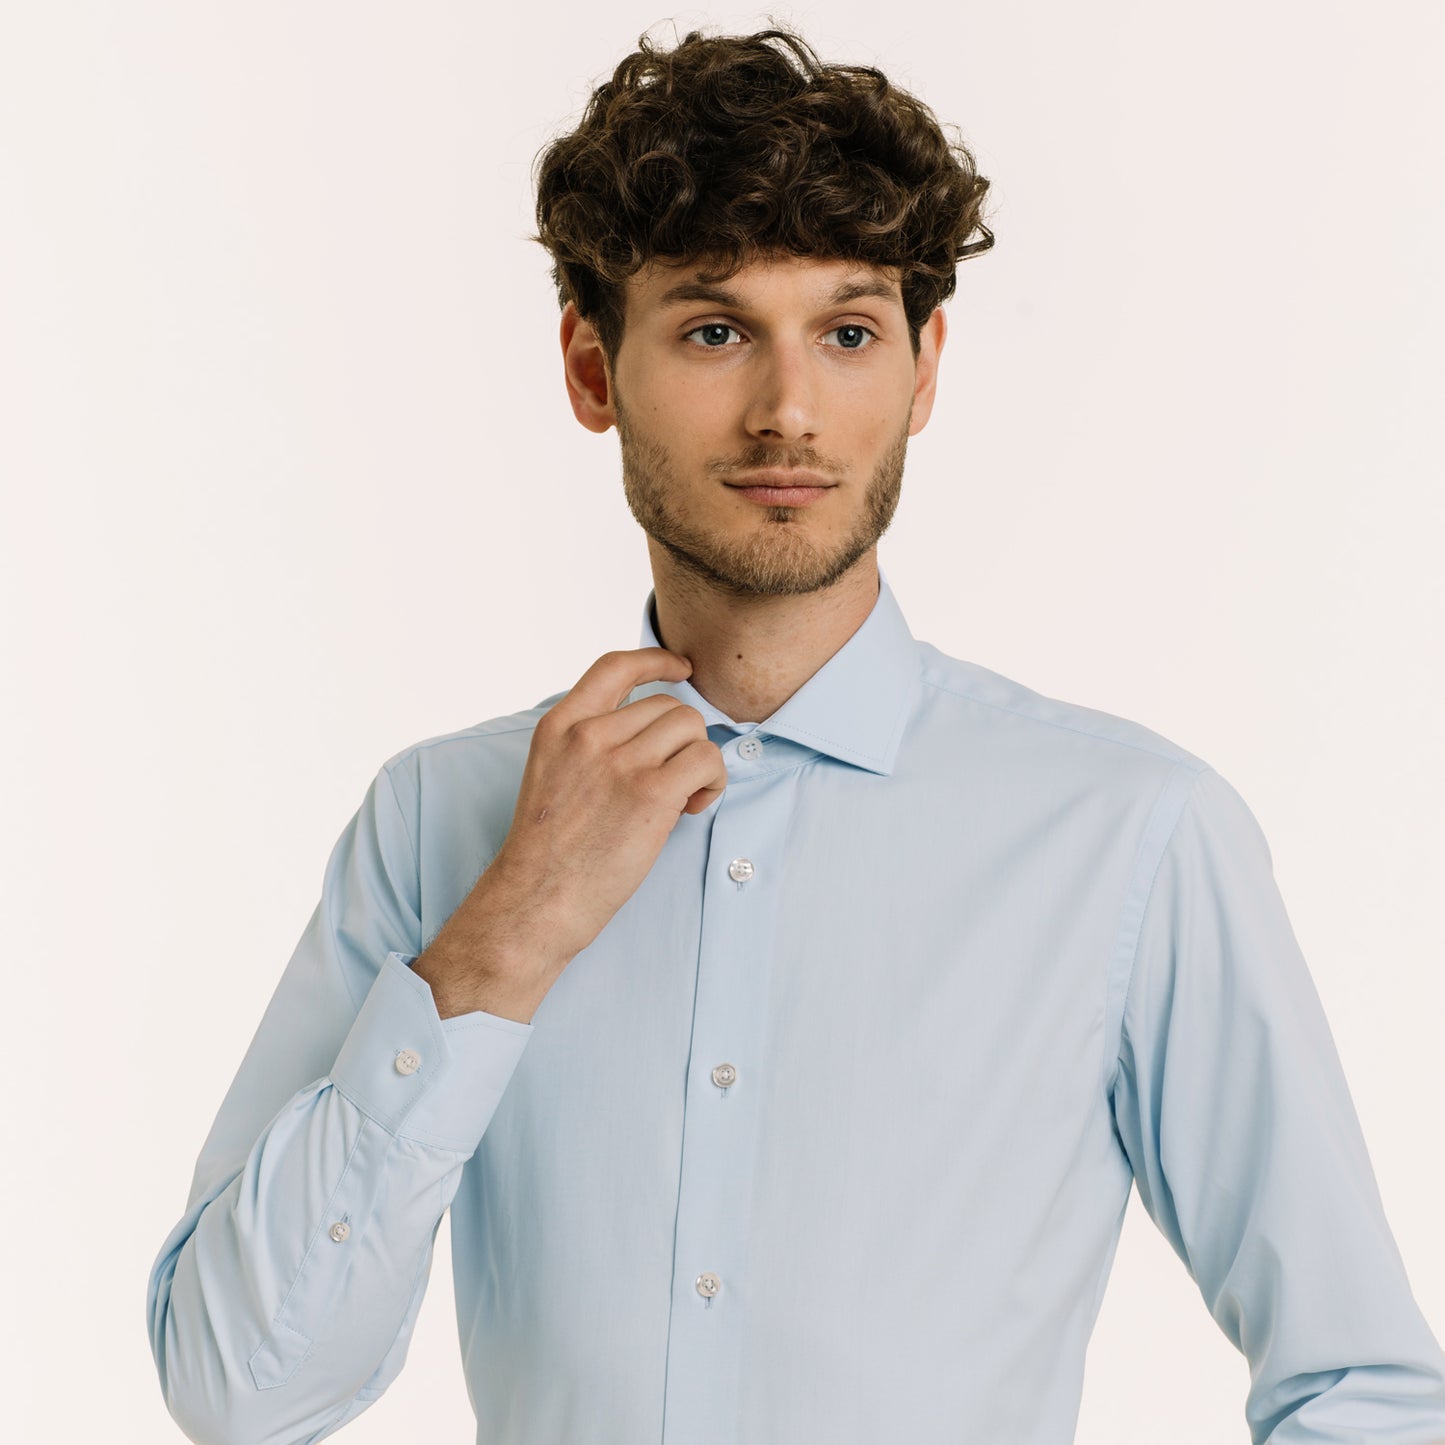 Fitted shirt in sky blue double-twisted poplin